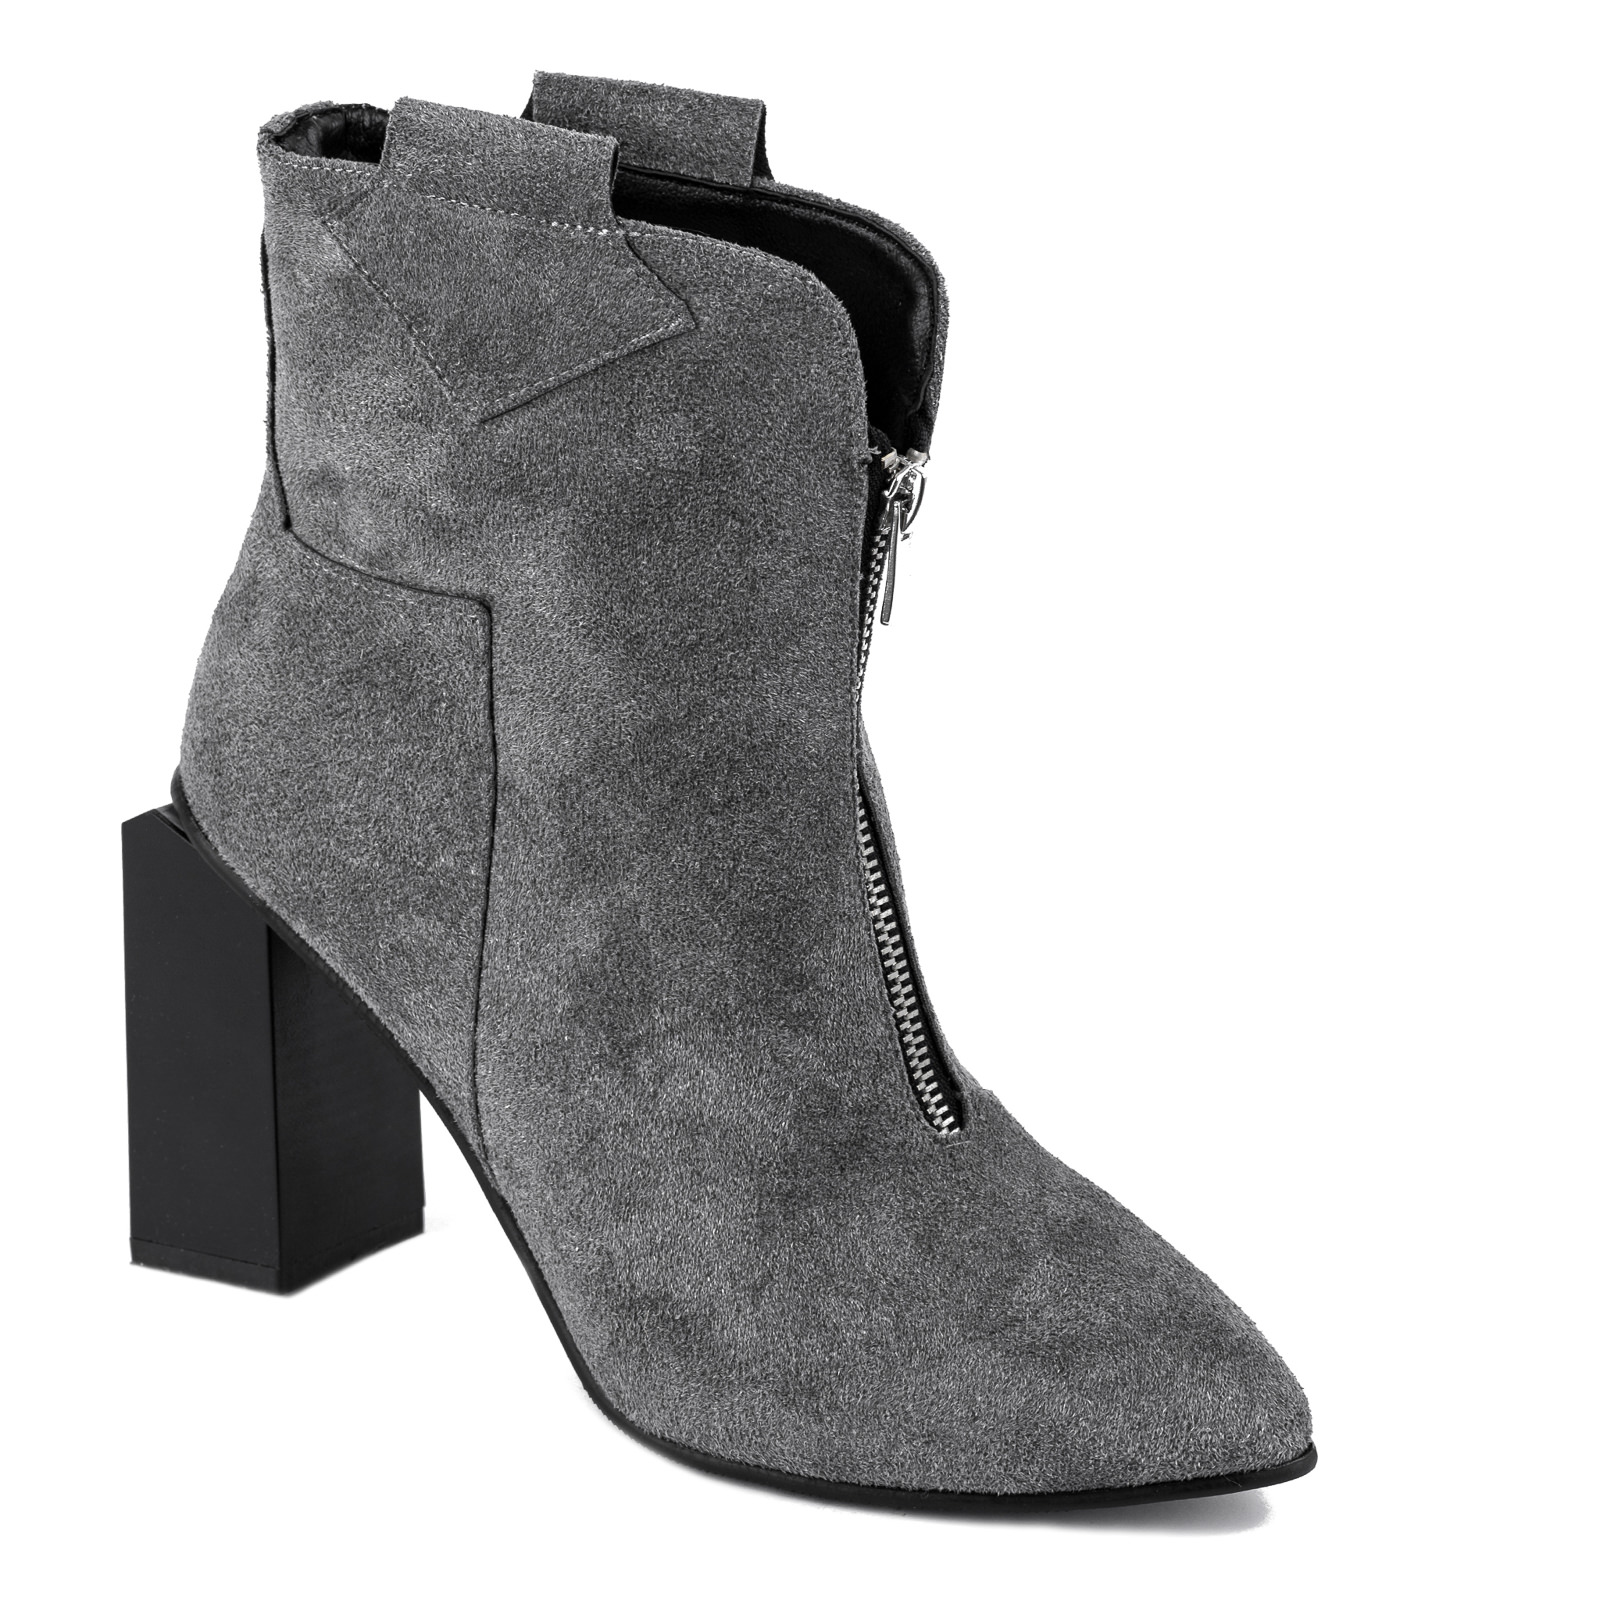 VELOUR POINTED ANKLE BOOTS WITH ZIPPER AND THICK HEEL - GRAY